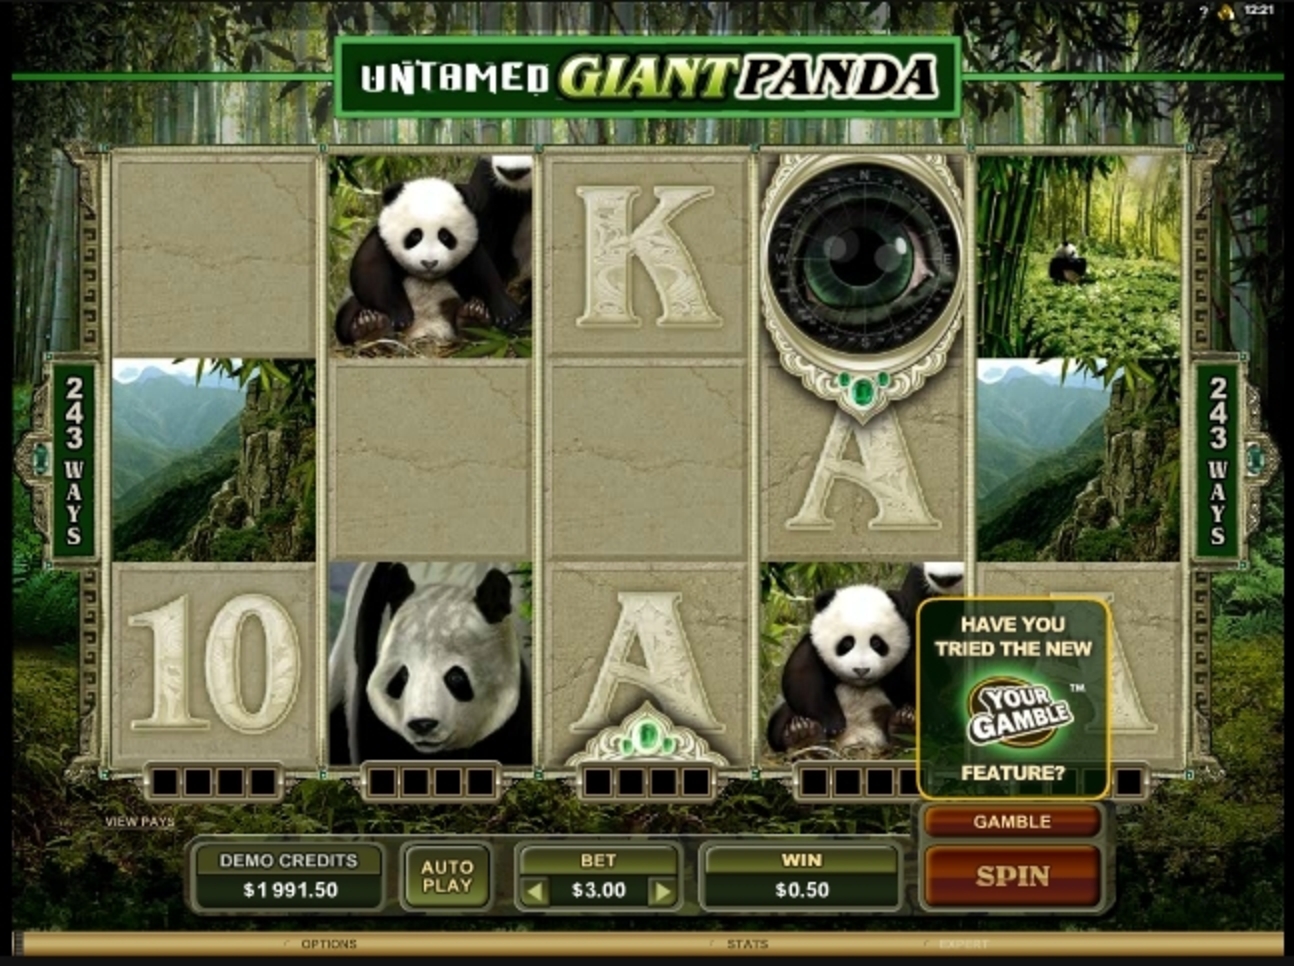 Win Money in Untamed Giant Panda Free Slot Game by Microgaming